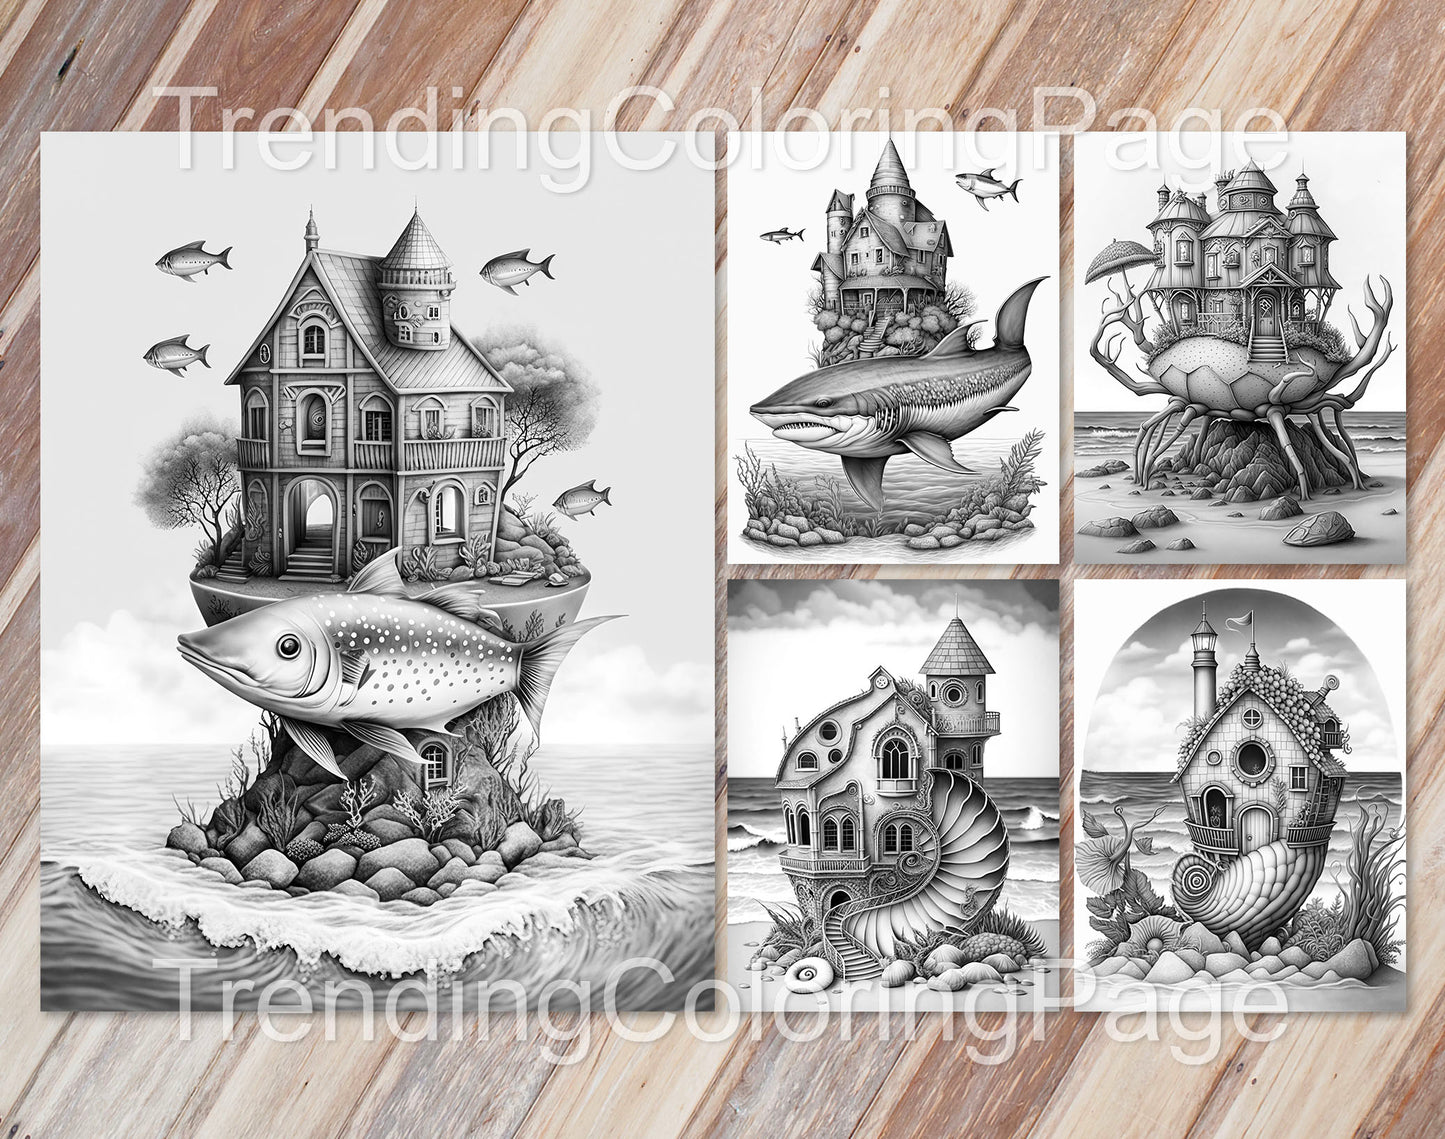 25 Fantasy Ocean Houses Grayscale Coloring Pages - Instant Download - Printable PDF Dark/Light